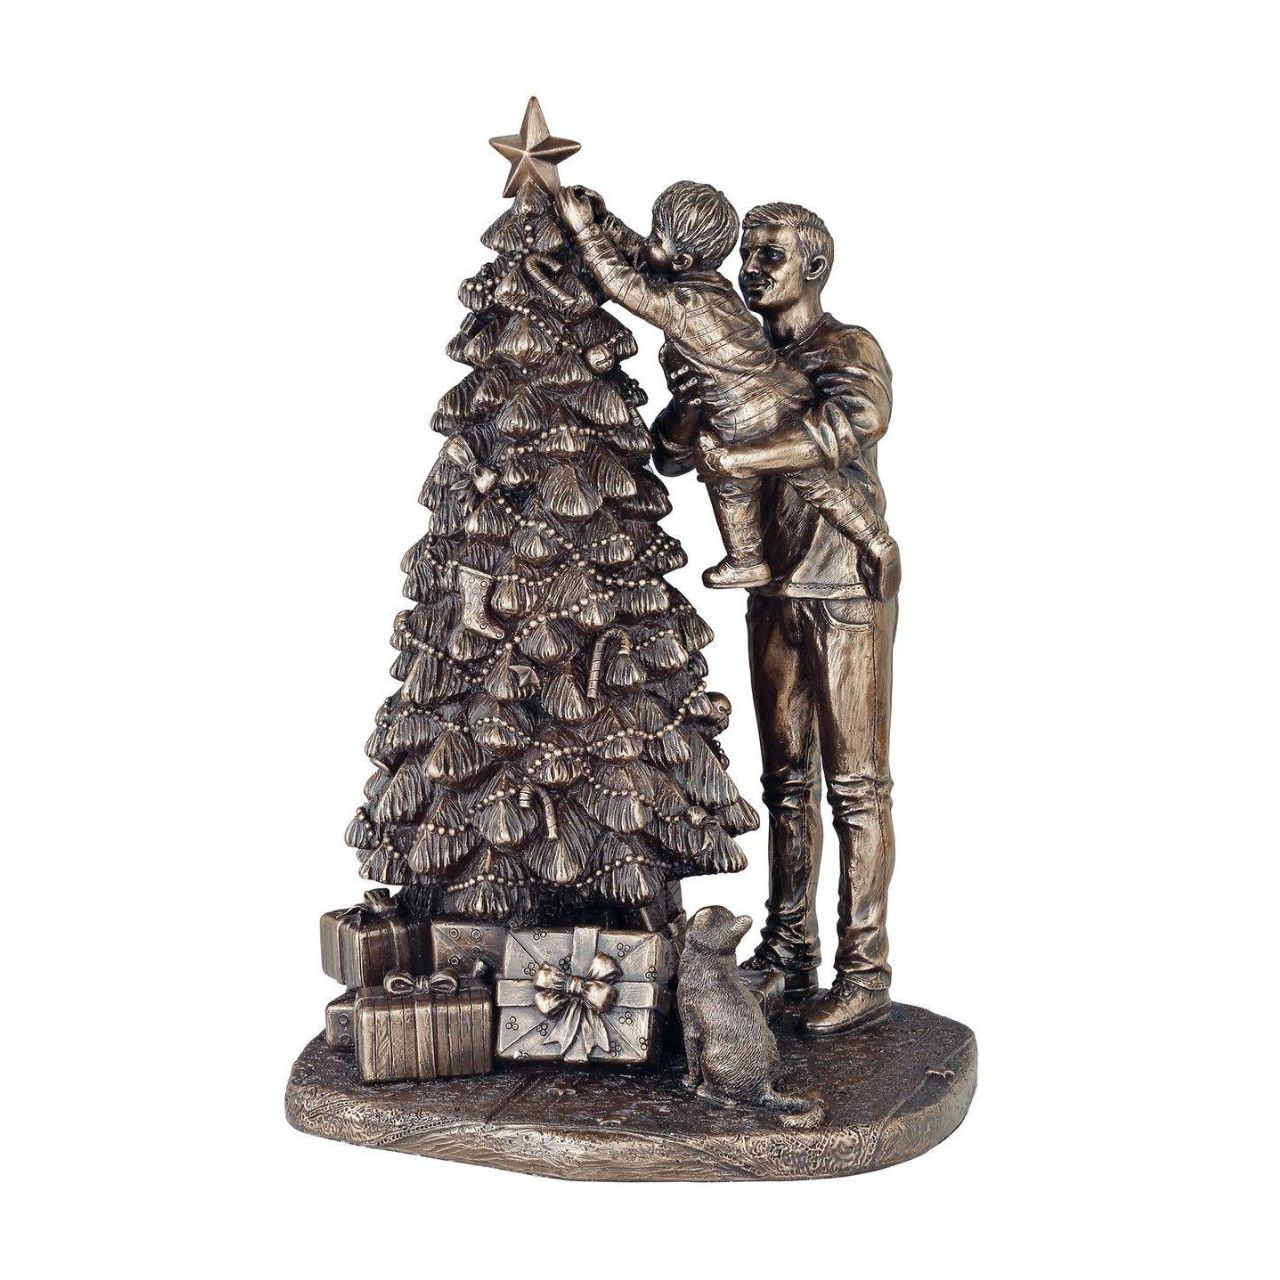 Genesis Ireland Christmas Star  A stunning ornament that is sure to bring festive cheer to your home. The Christmas bronze ornament is exquisitely detailed of a father helping his young son to put the star on top of the Christmas tree, and would be an amazing gift for friends or family.